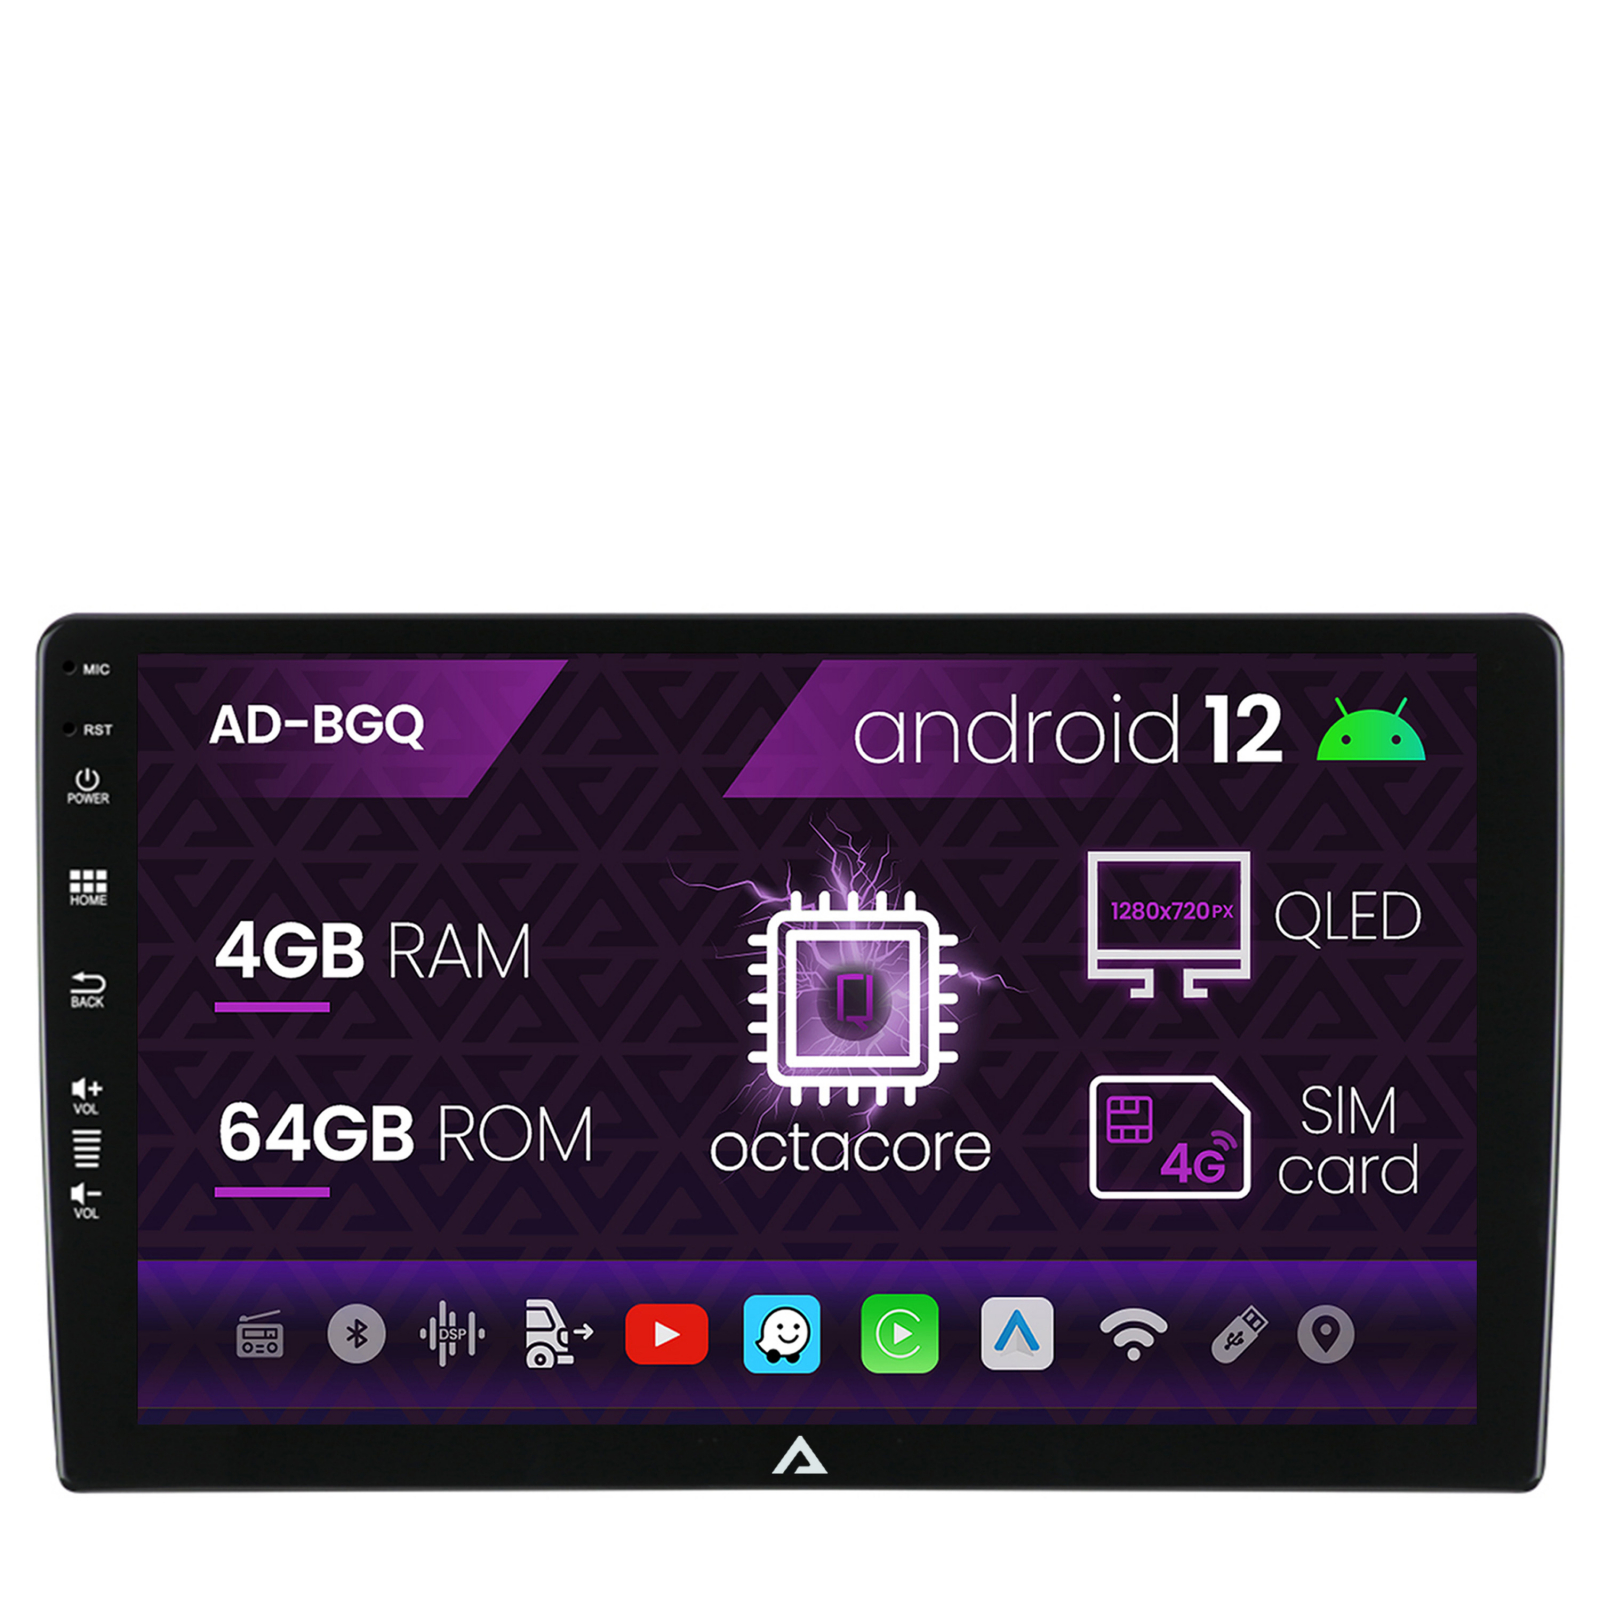 Navigatie All-in-one Universala, Android 12, Q-Octacore / 4GB RAM + 64GB ROM, 10.1 Inch - AD-BGQ10004